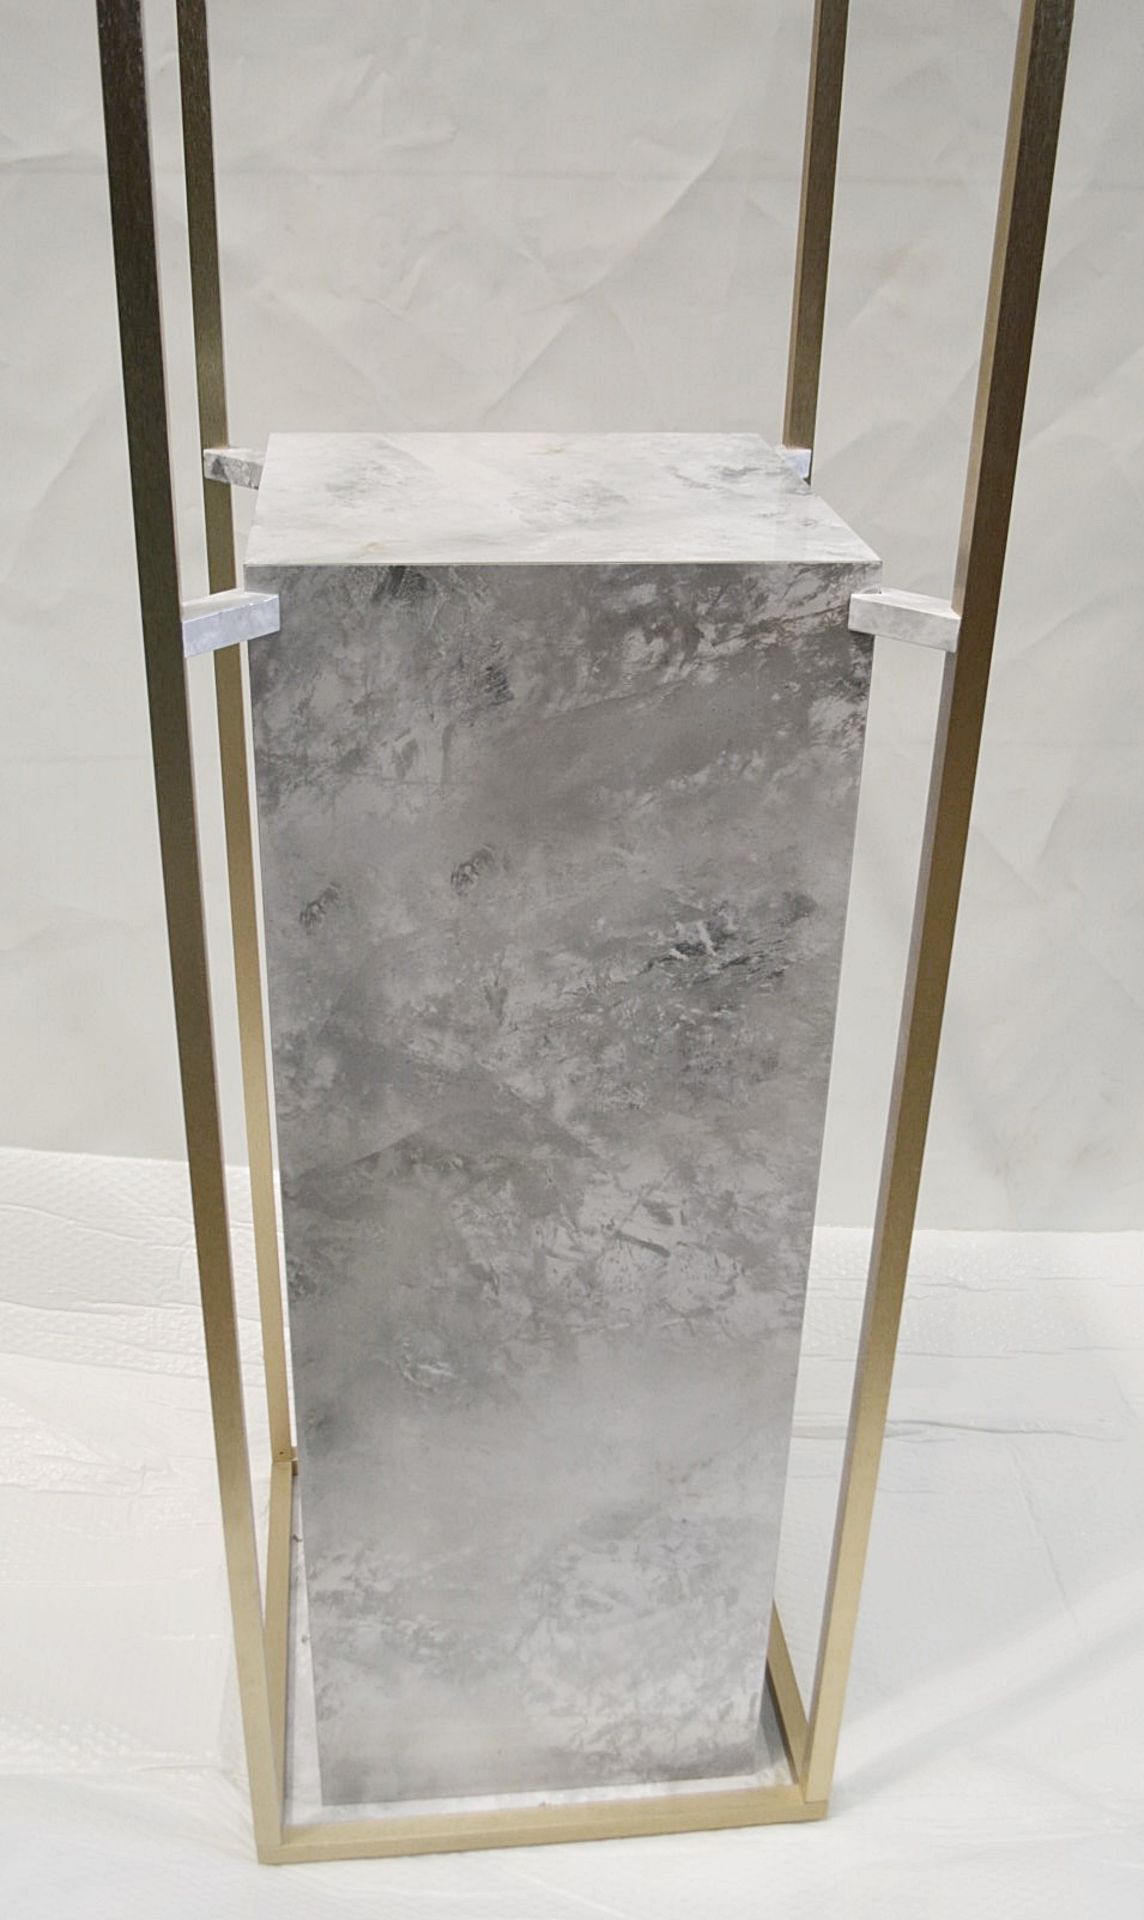 1 x 1.8 Metre Tall Freestanding Display Plinth With A Marble Effect Aestetic - Dimensions: H182 x - Image 3 of 4